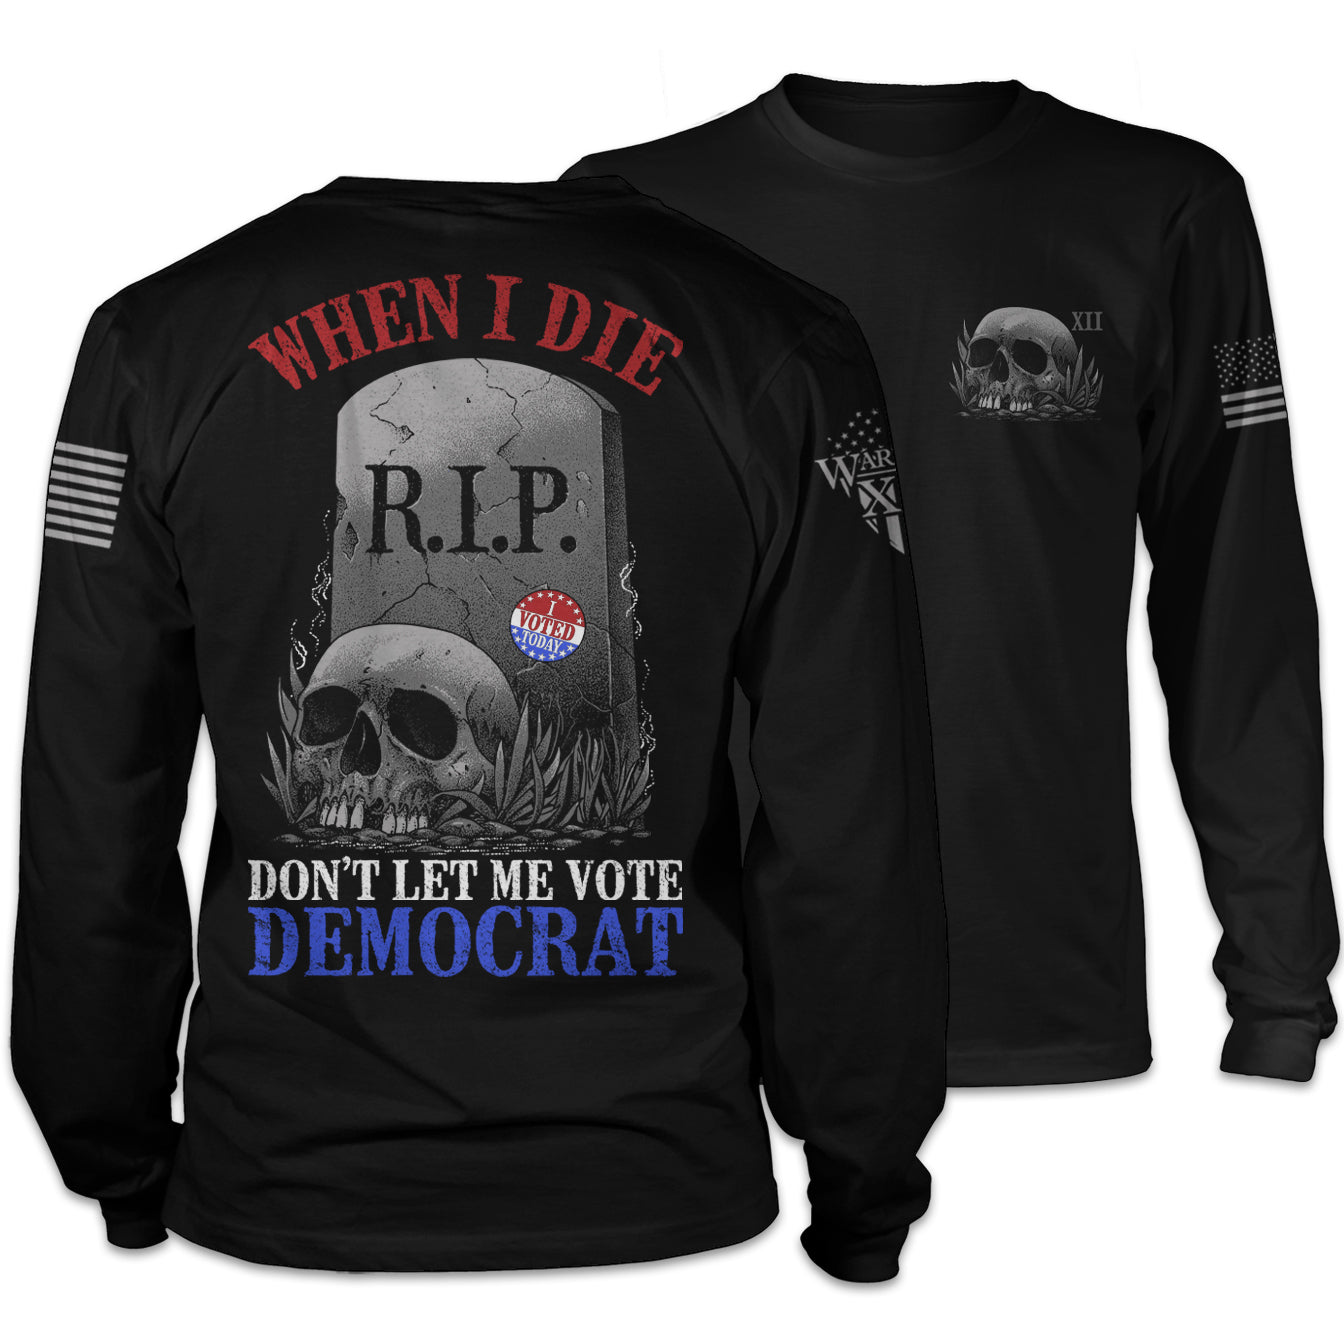 A black long sleeve shirt with the words "When I die, don't let me vote Democrat" with a gravestone and a skull printed on the back of the shirt.